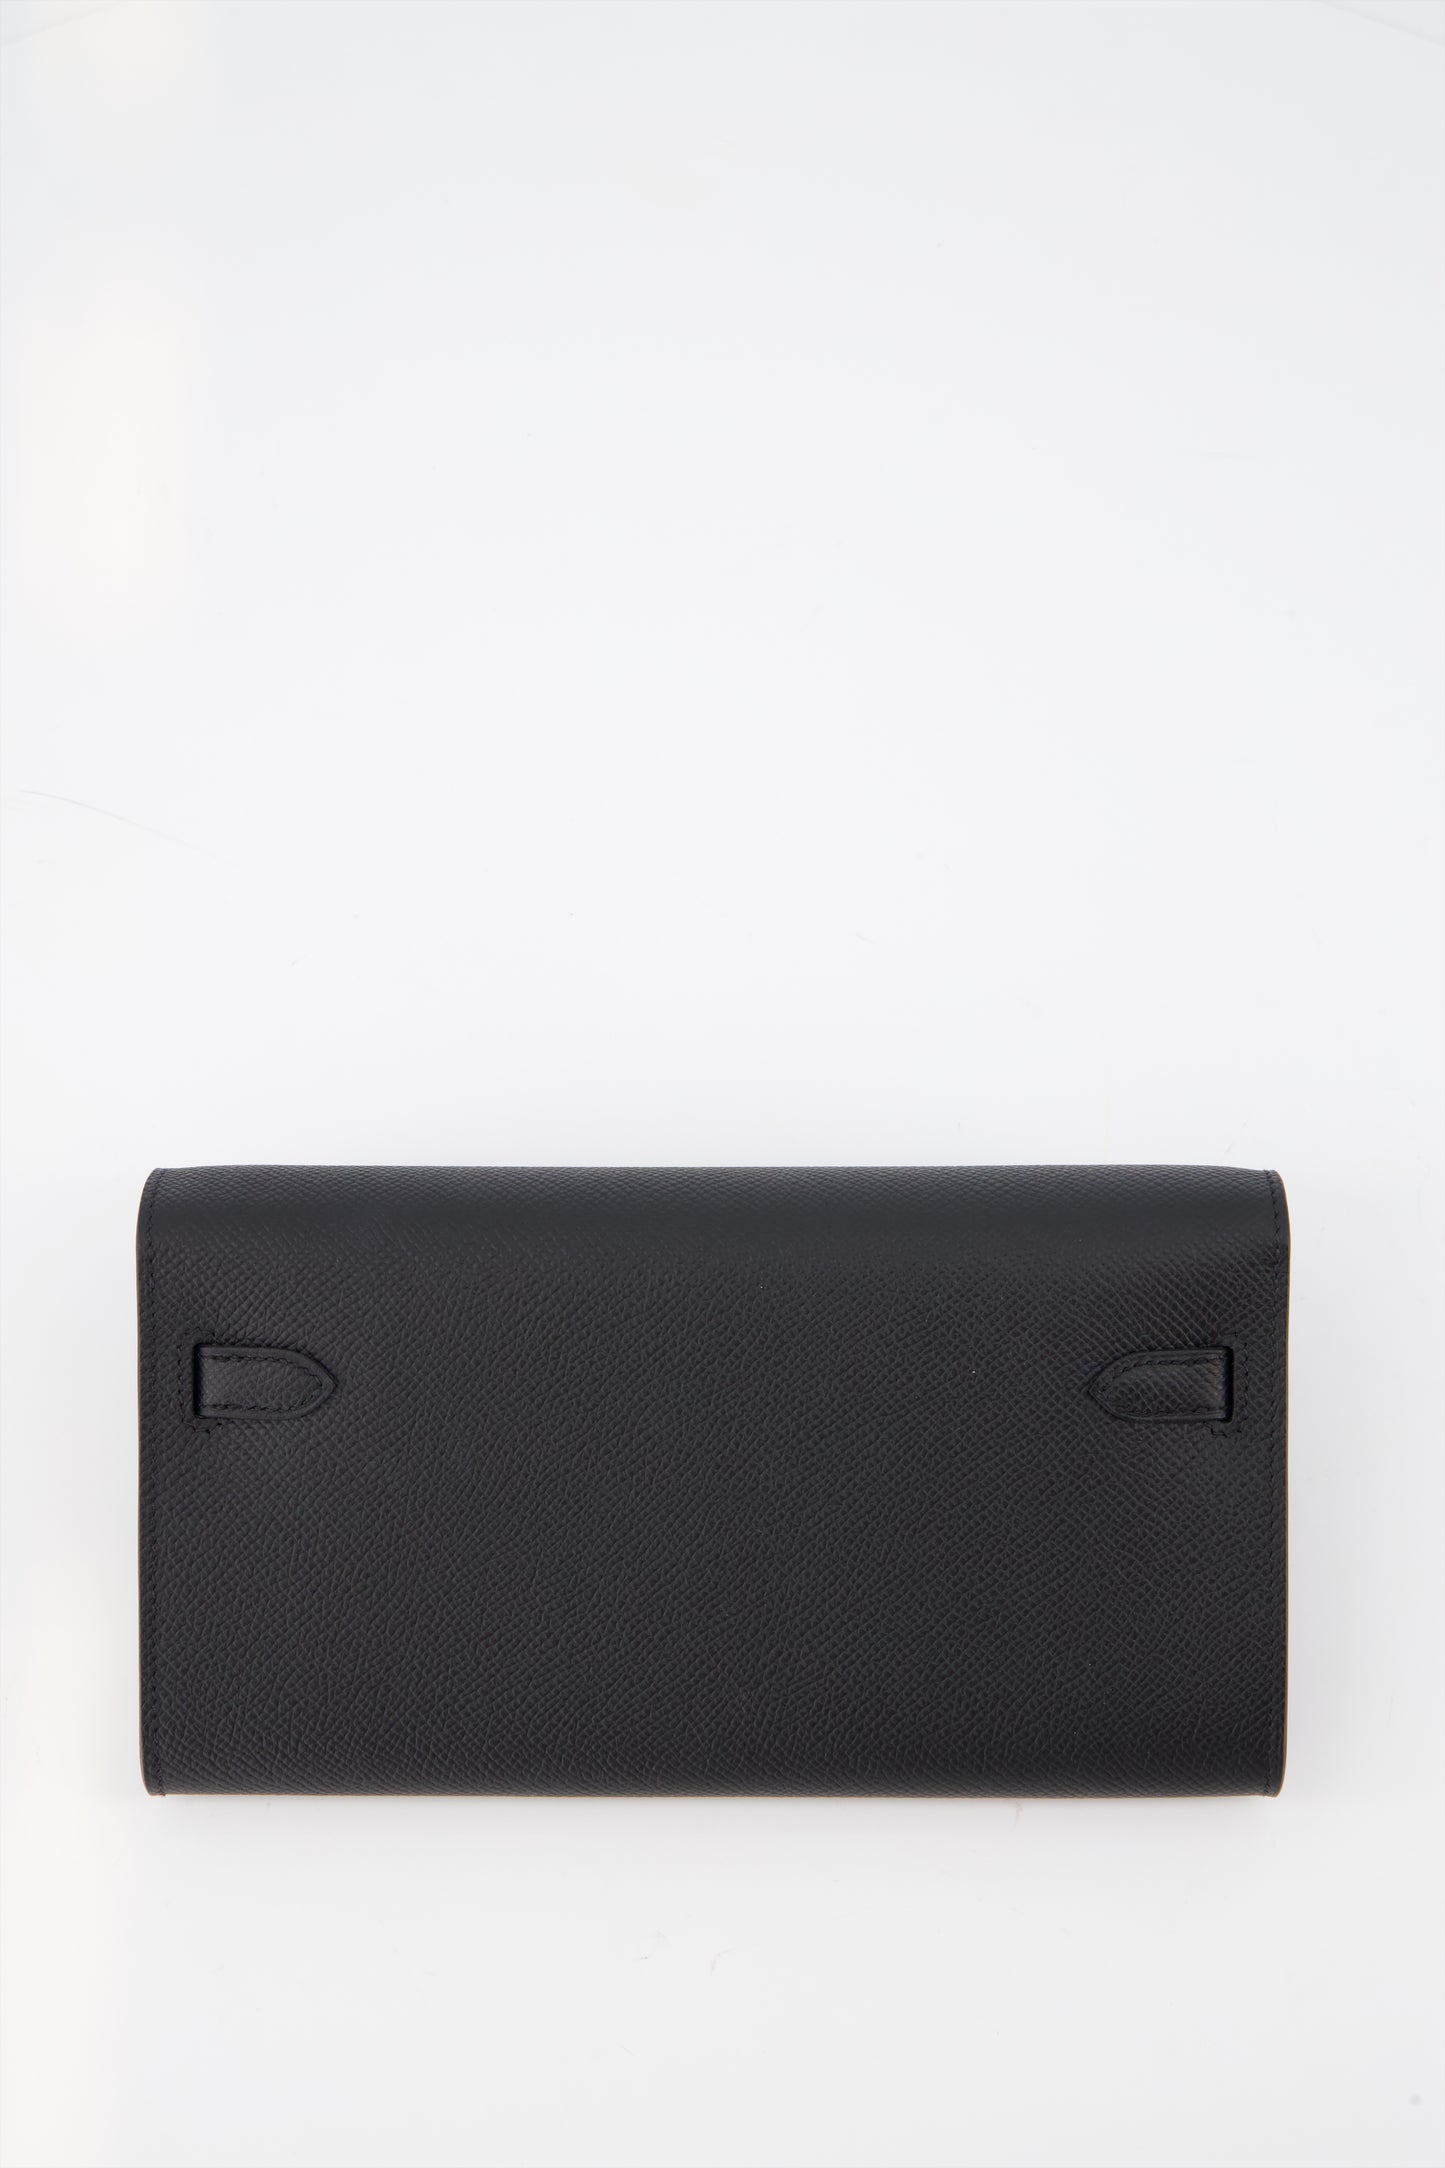 Hermes Kelly Classique To Go Wallet Black Leather With Palladium Kelly Closure Hardware.  Removable Shoulder Strap, 4 Credit Card Slots And Zipped Change Purse